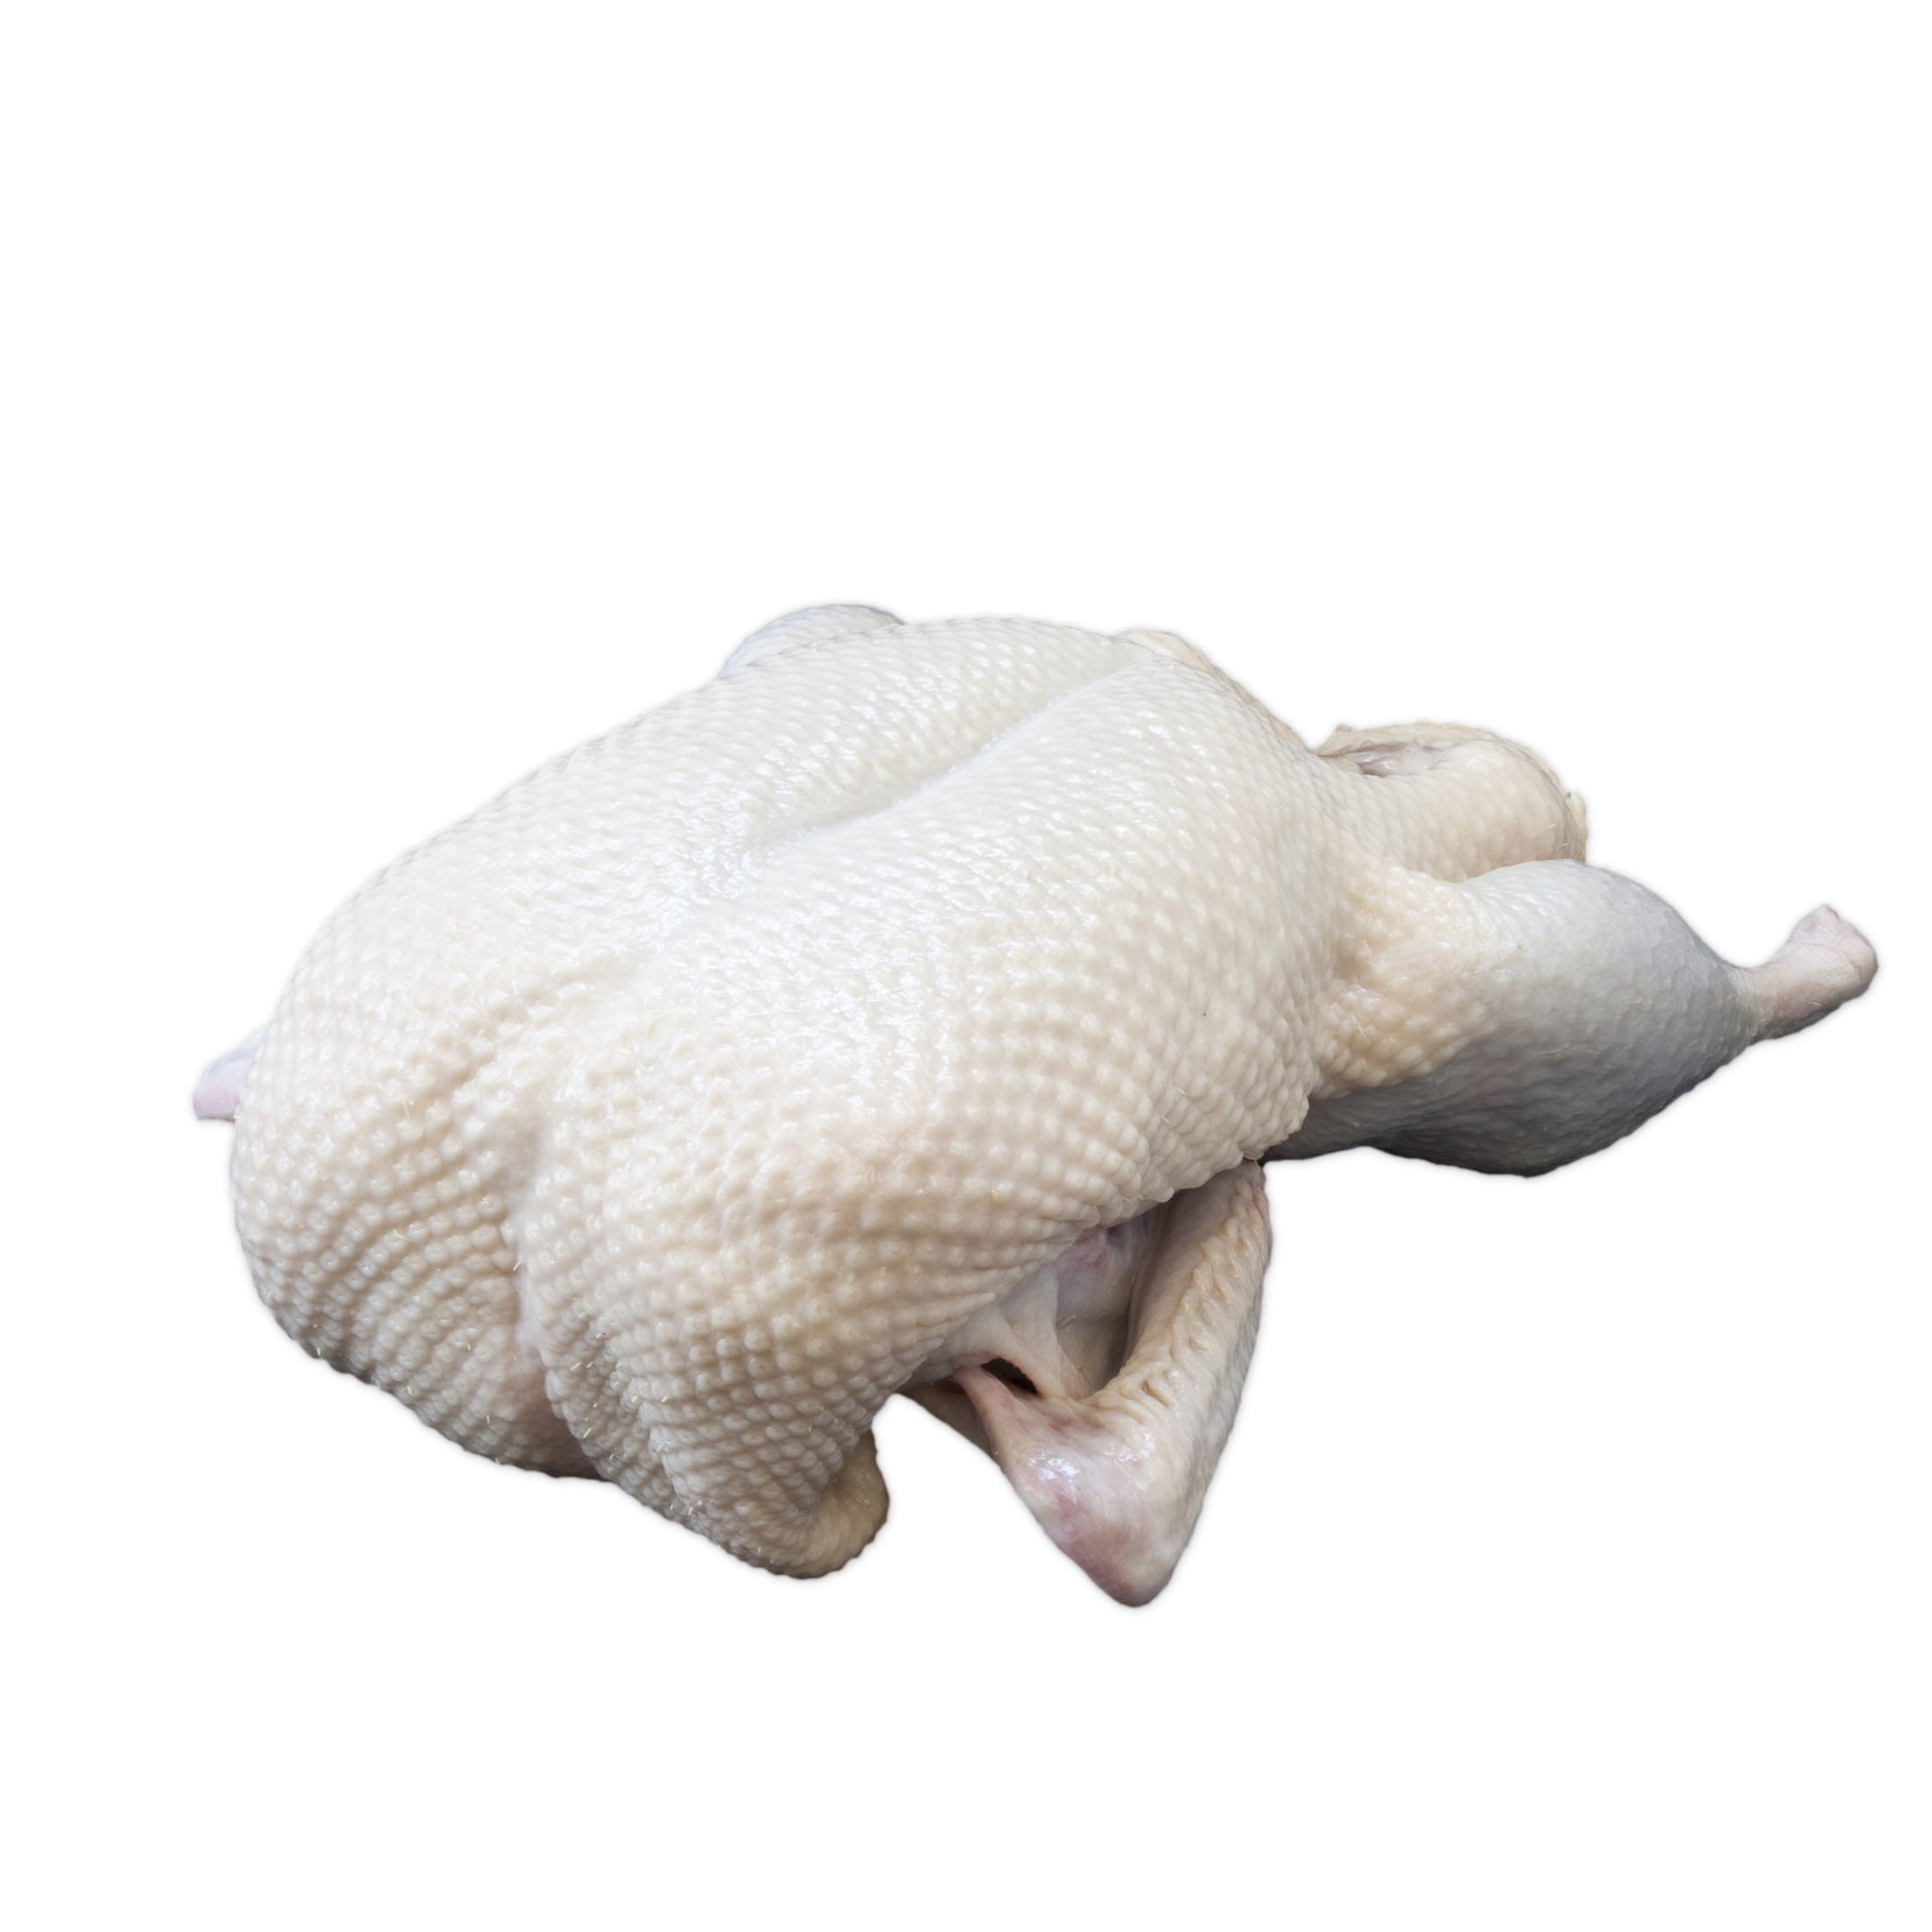 Air-Chilled Orvia Whole Duck, Frozen 4.75-5 LB average